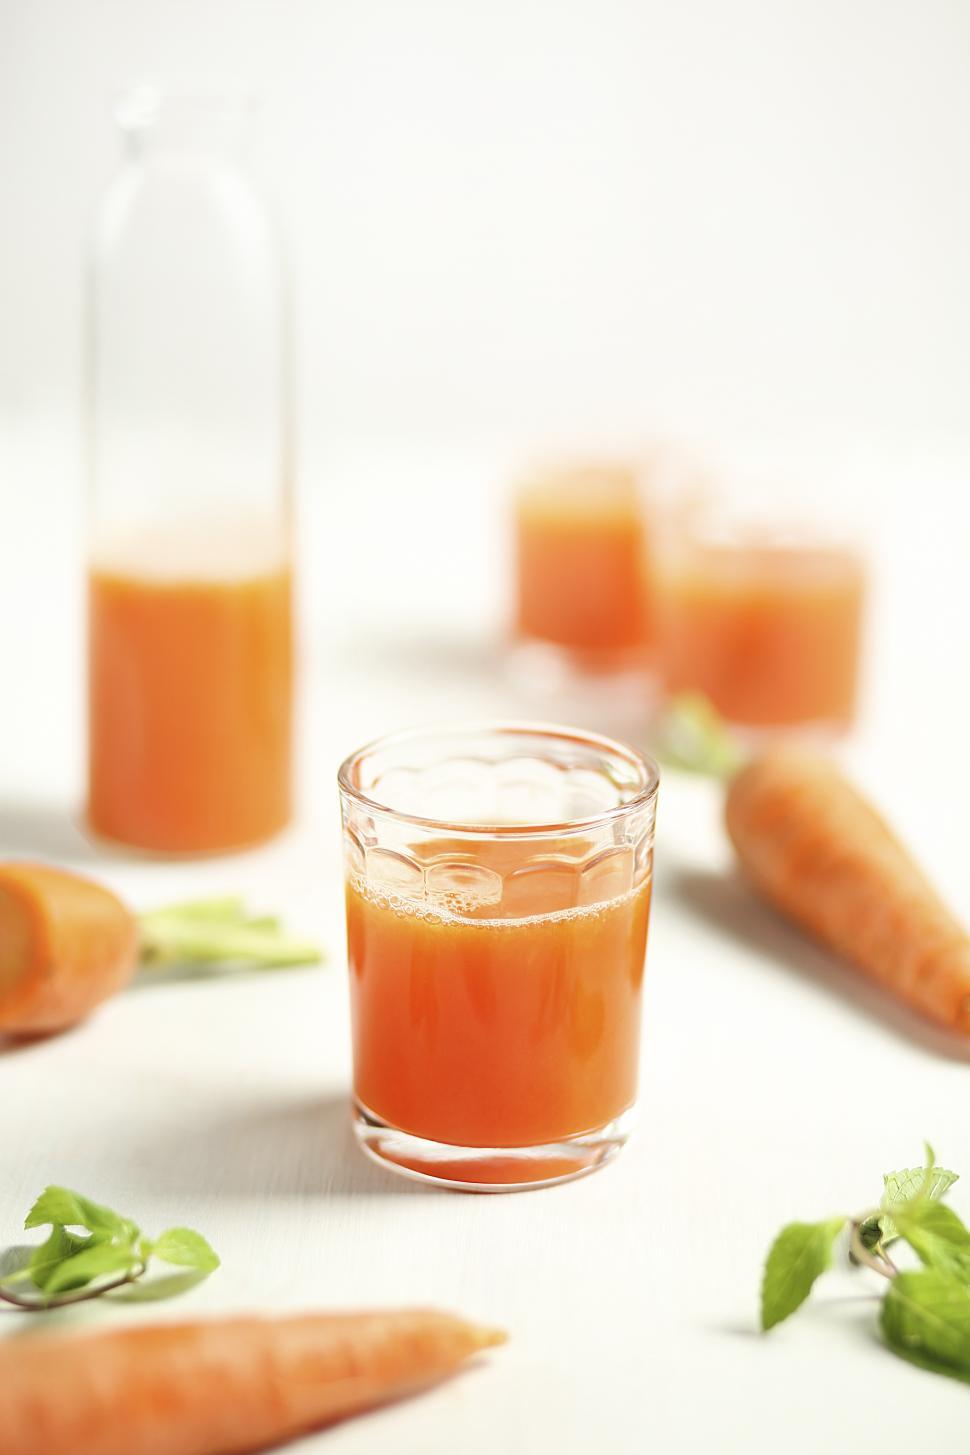 Free Image of Selective Focus on glasses of carrot juice 